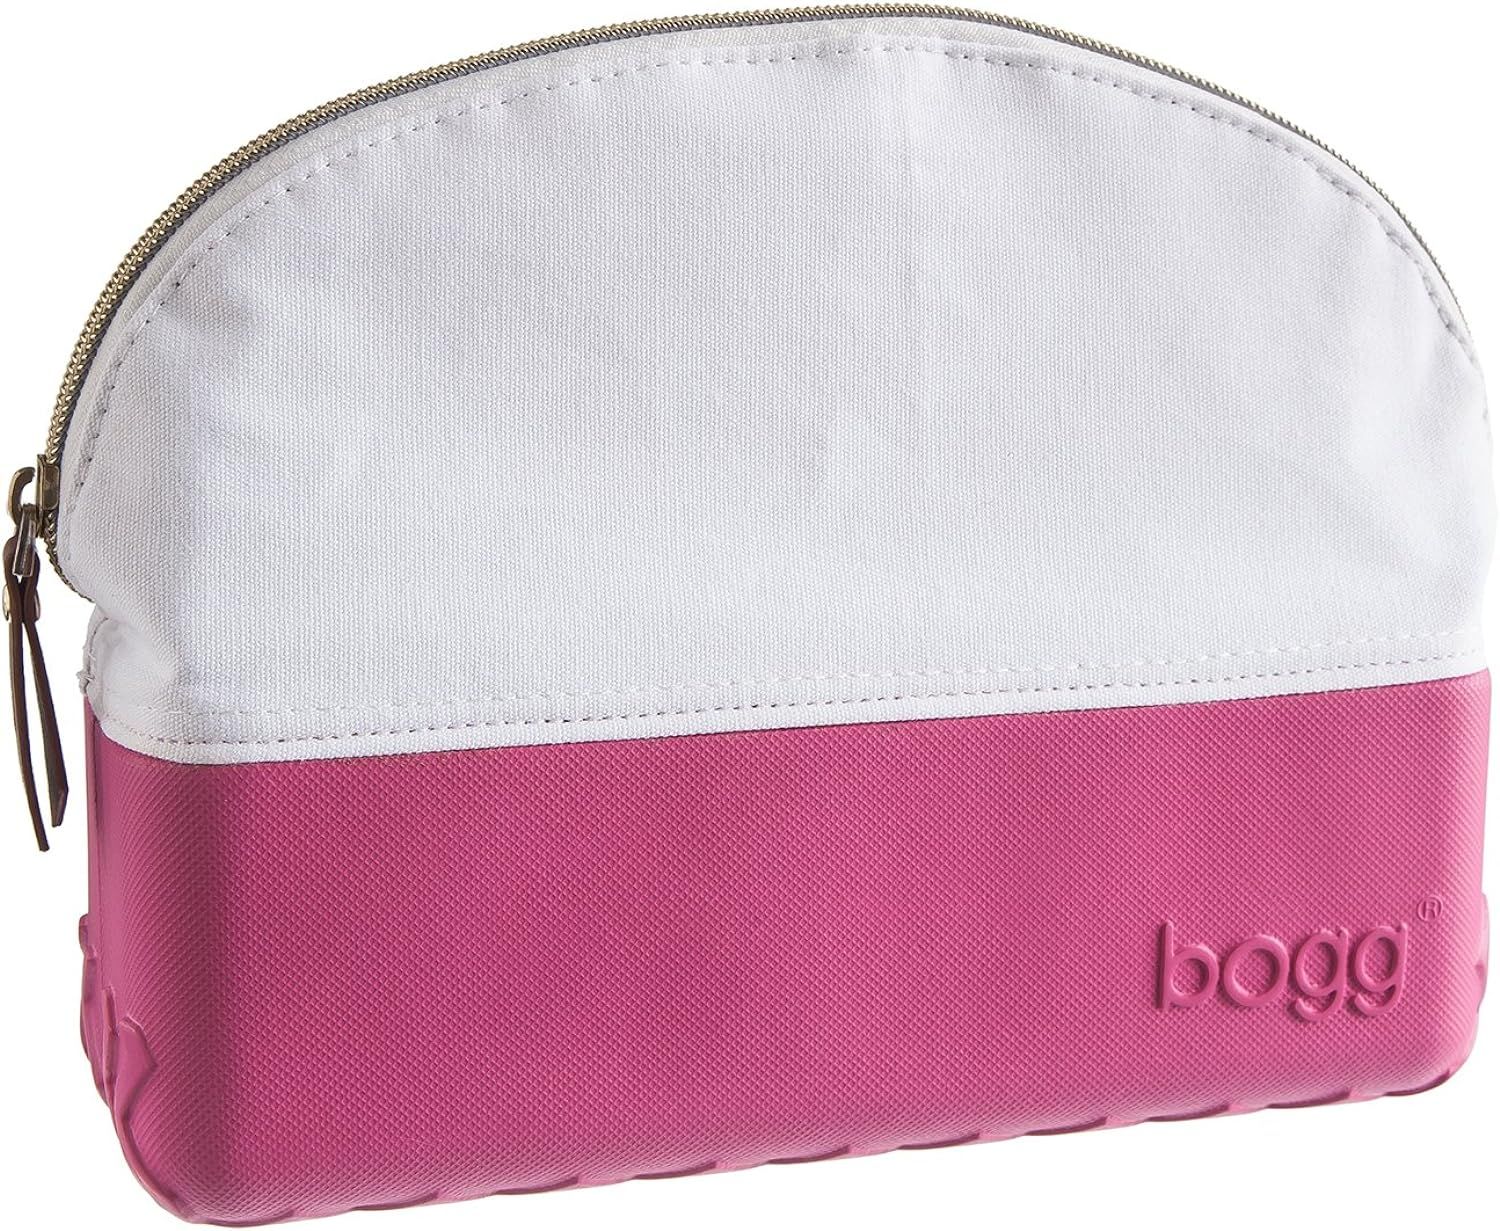 Cosmetic Makeup Bag Waterproof Pouch and Organizer Perfect Travel Beauty Case from Bogg Bag | Amazon (US)